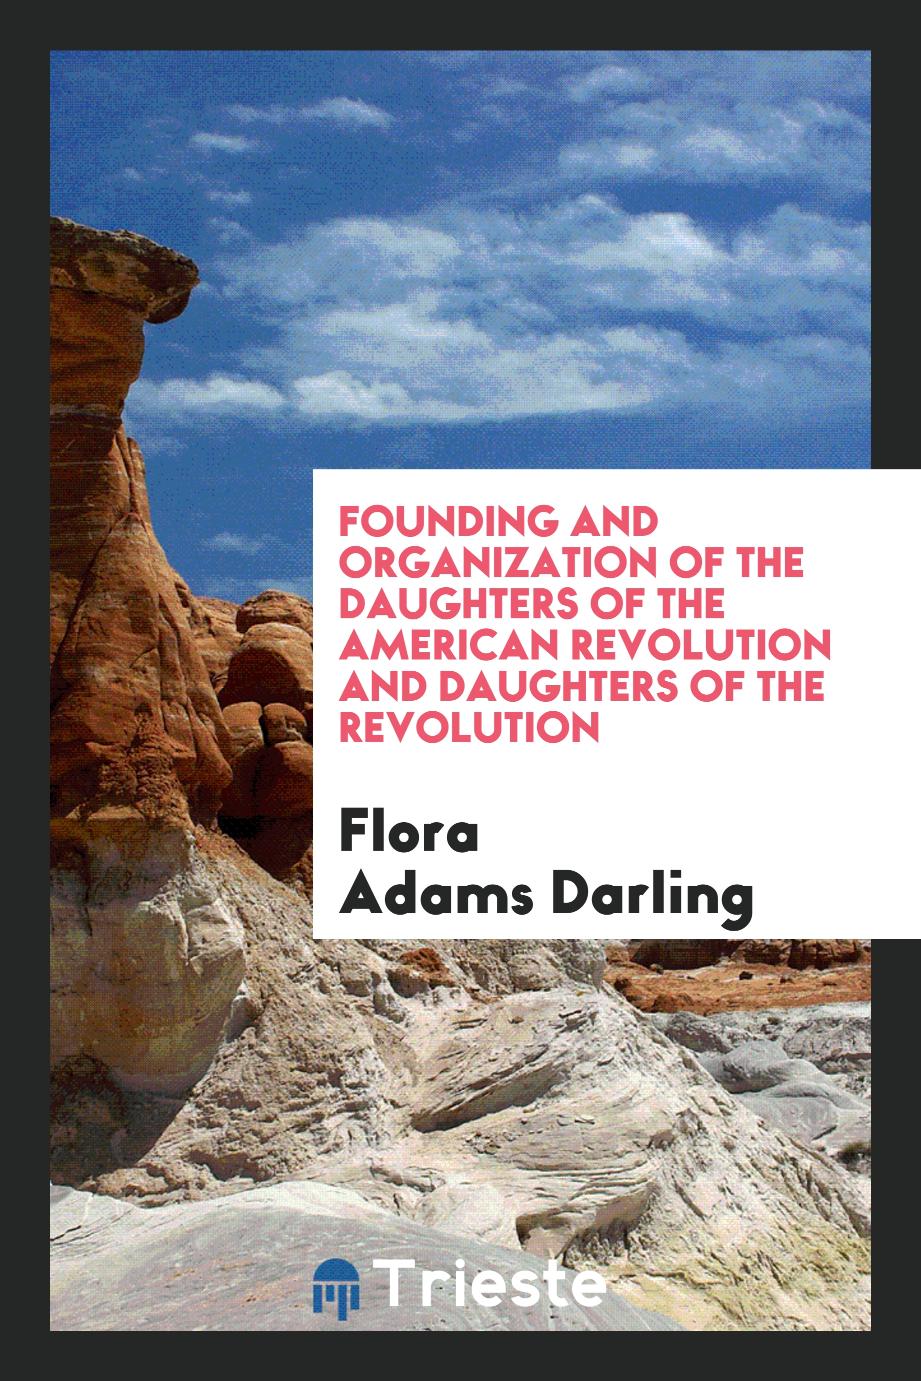 Founding and organization of the Daughters of the American revolution and Daughters of the revolution